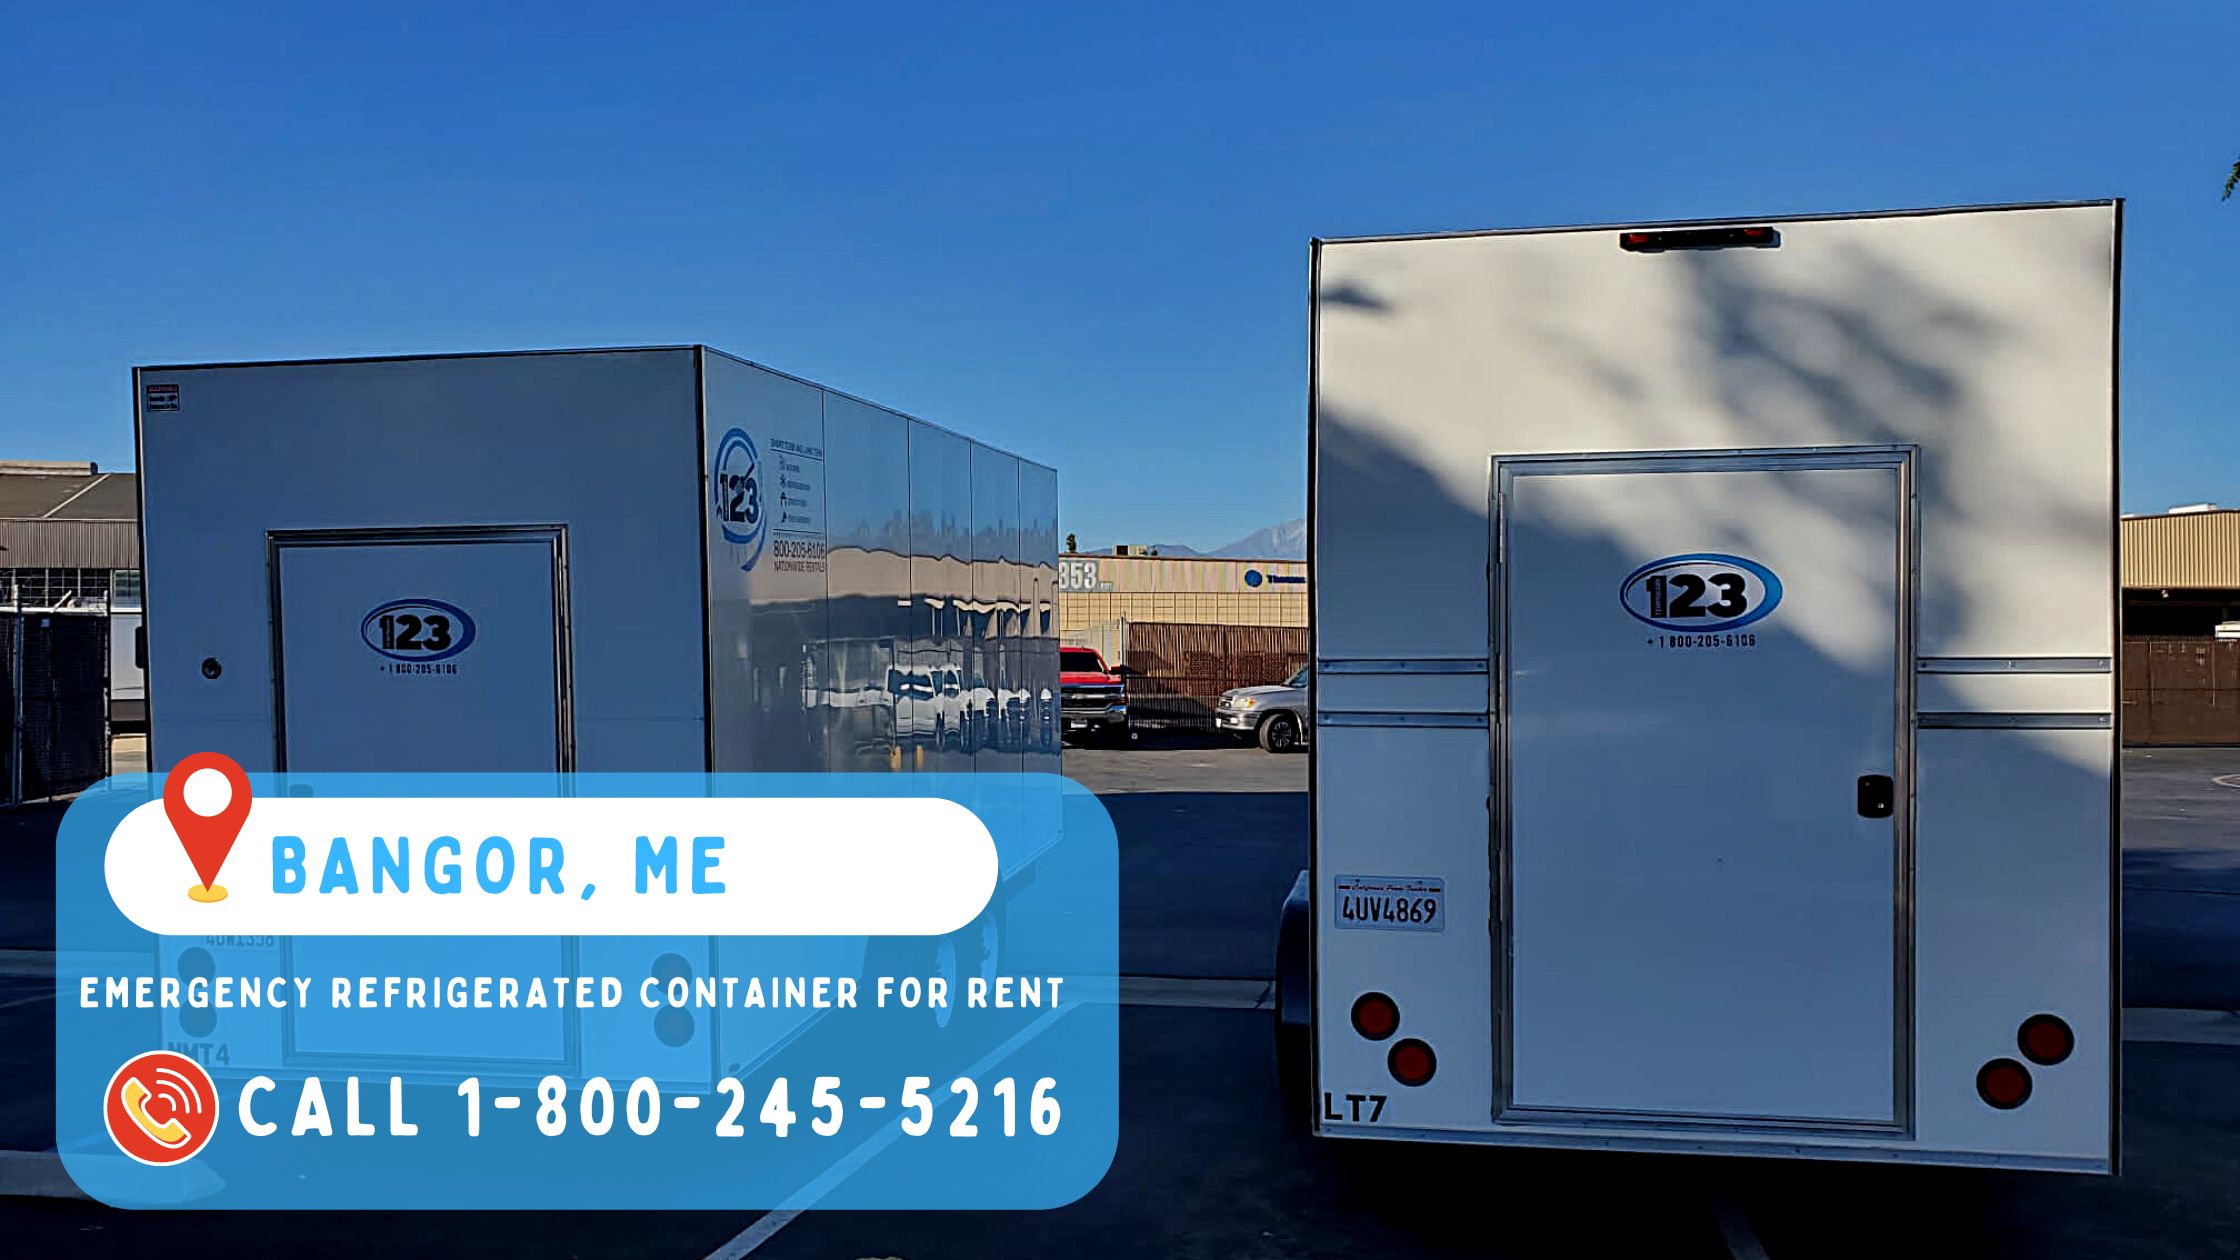 Emergency refrigerated container for rent in Bangor